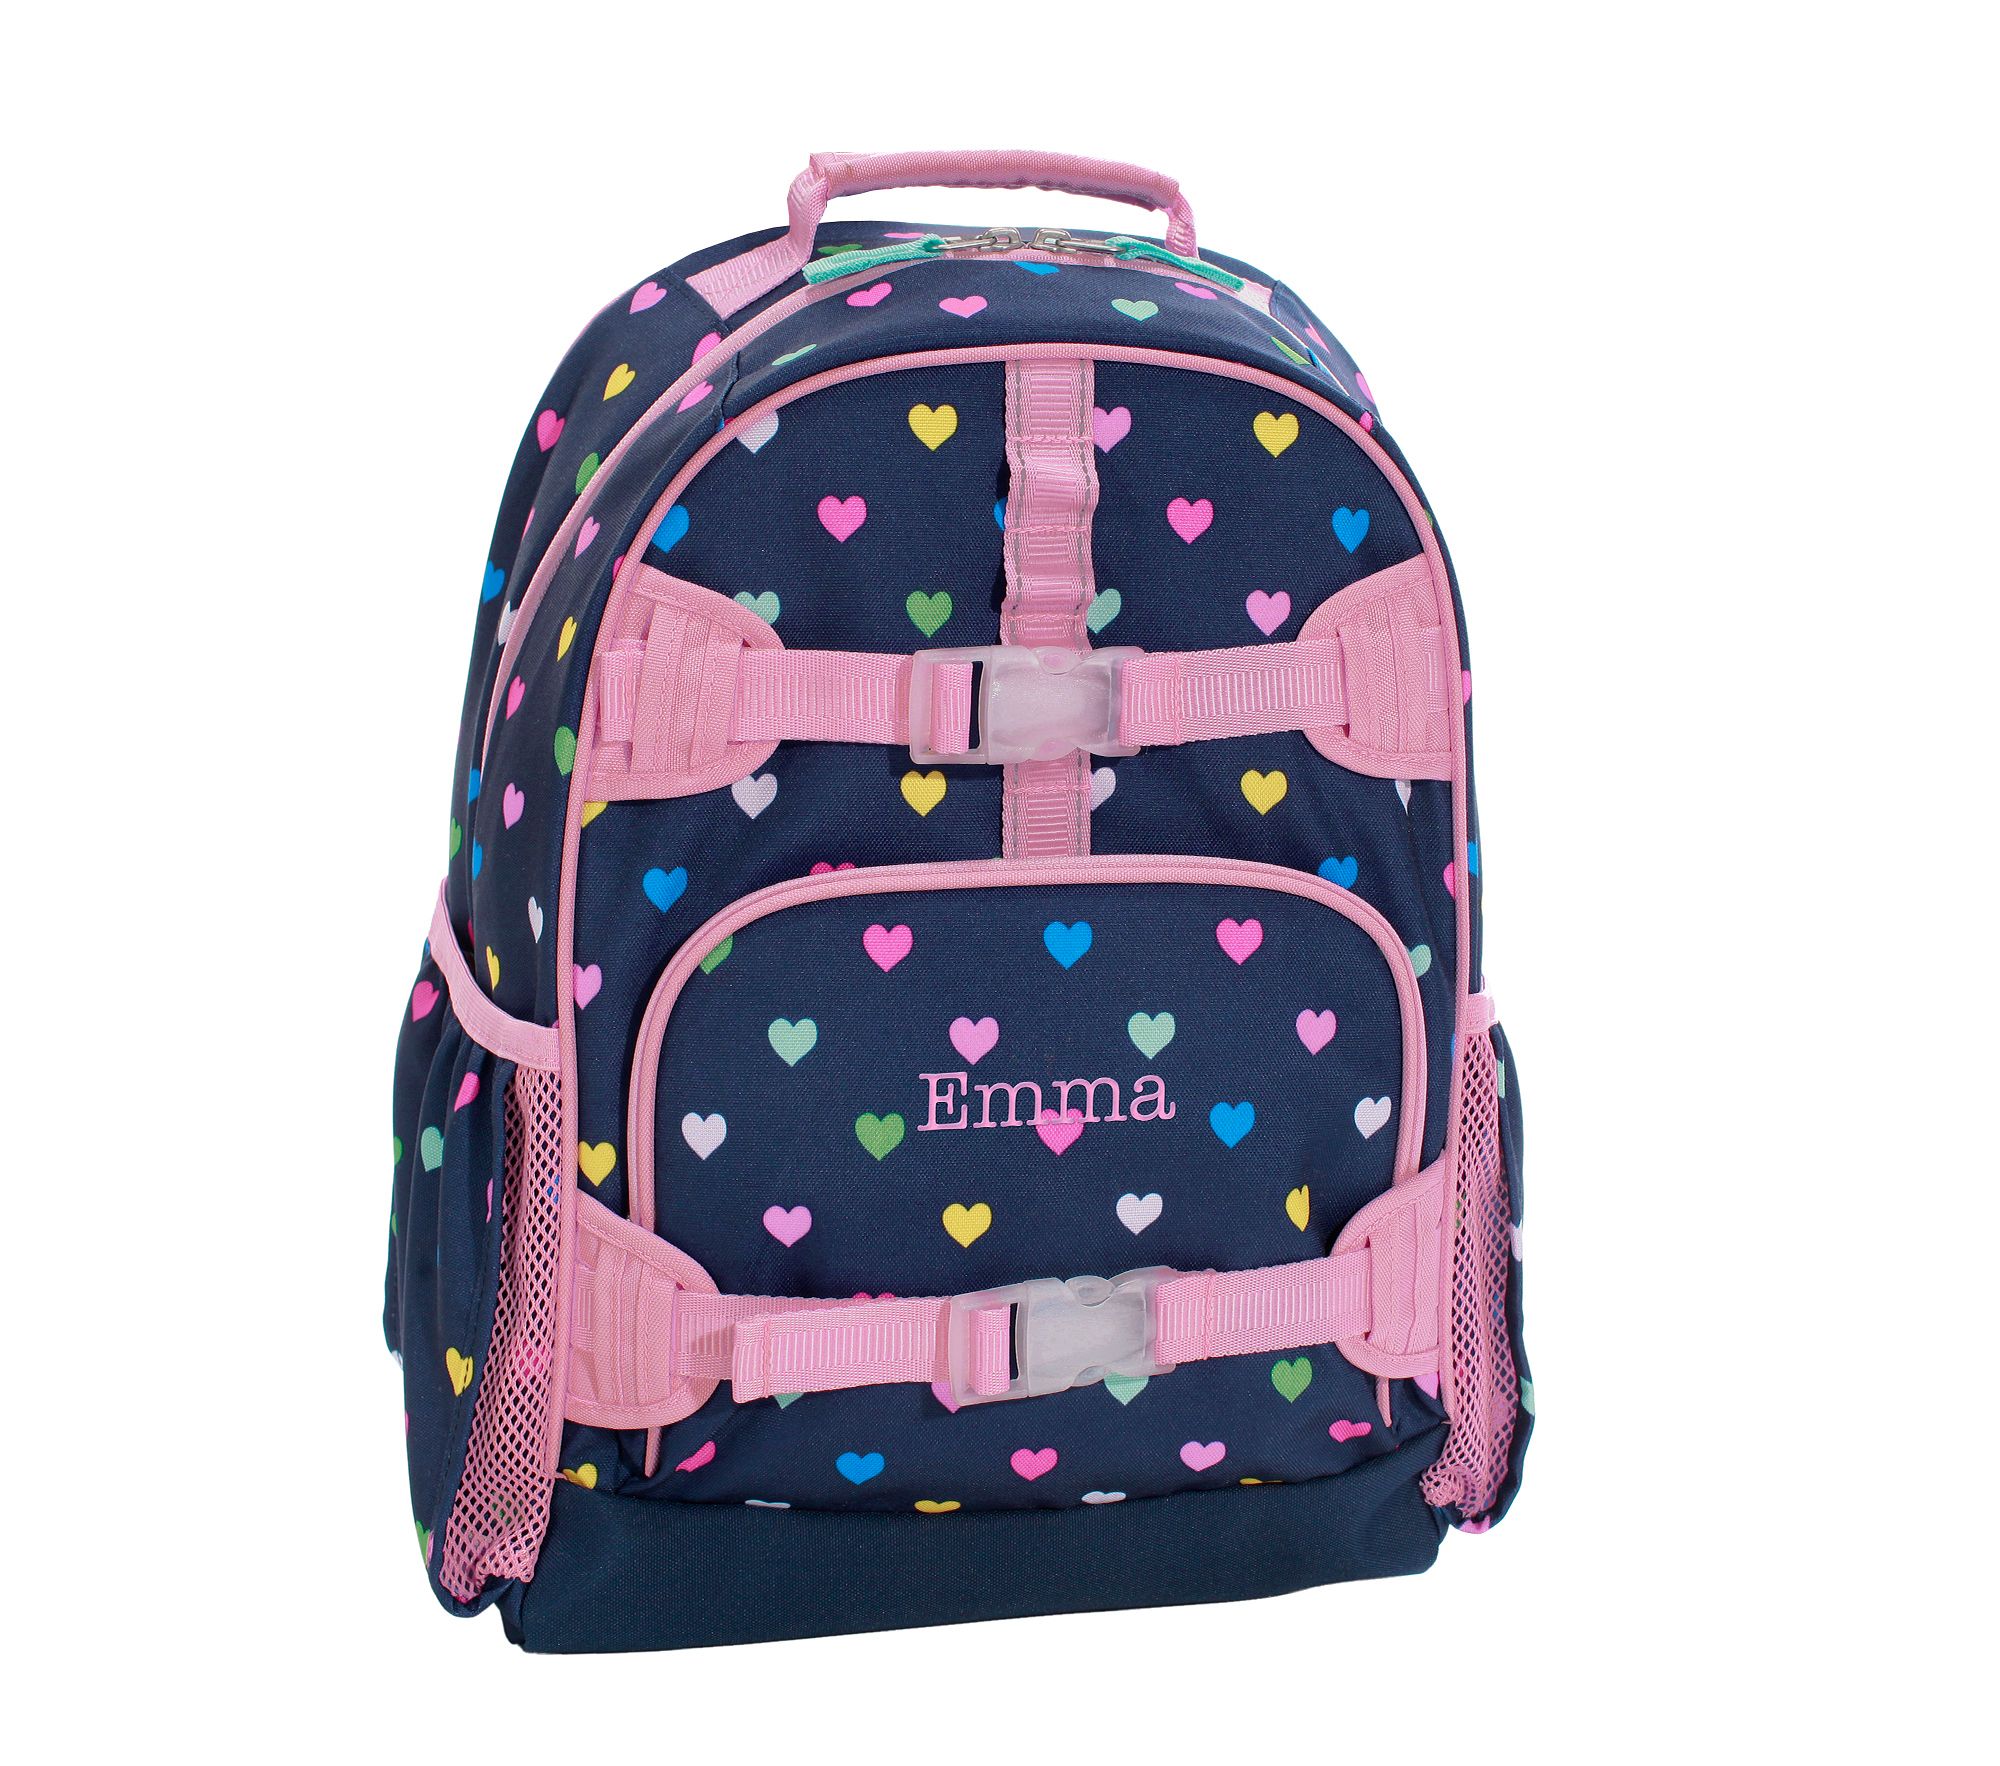 Shop the best backpacks for back to school - Good Morning America